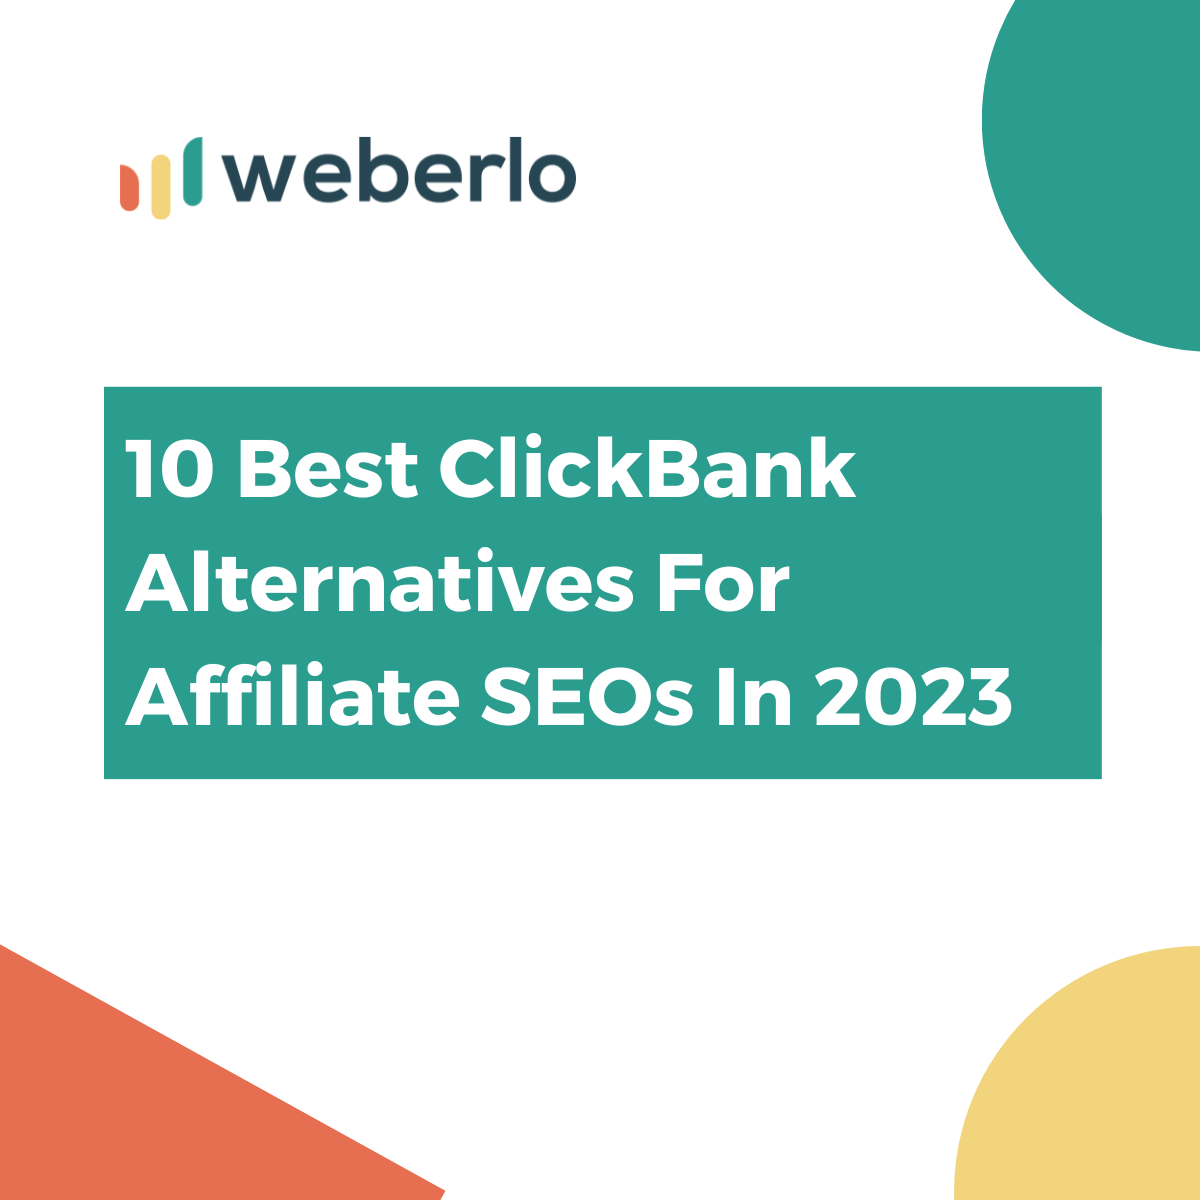 10 Best ClickBank Alternatives For Affiliate SEOs In 2023